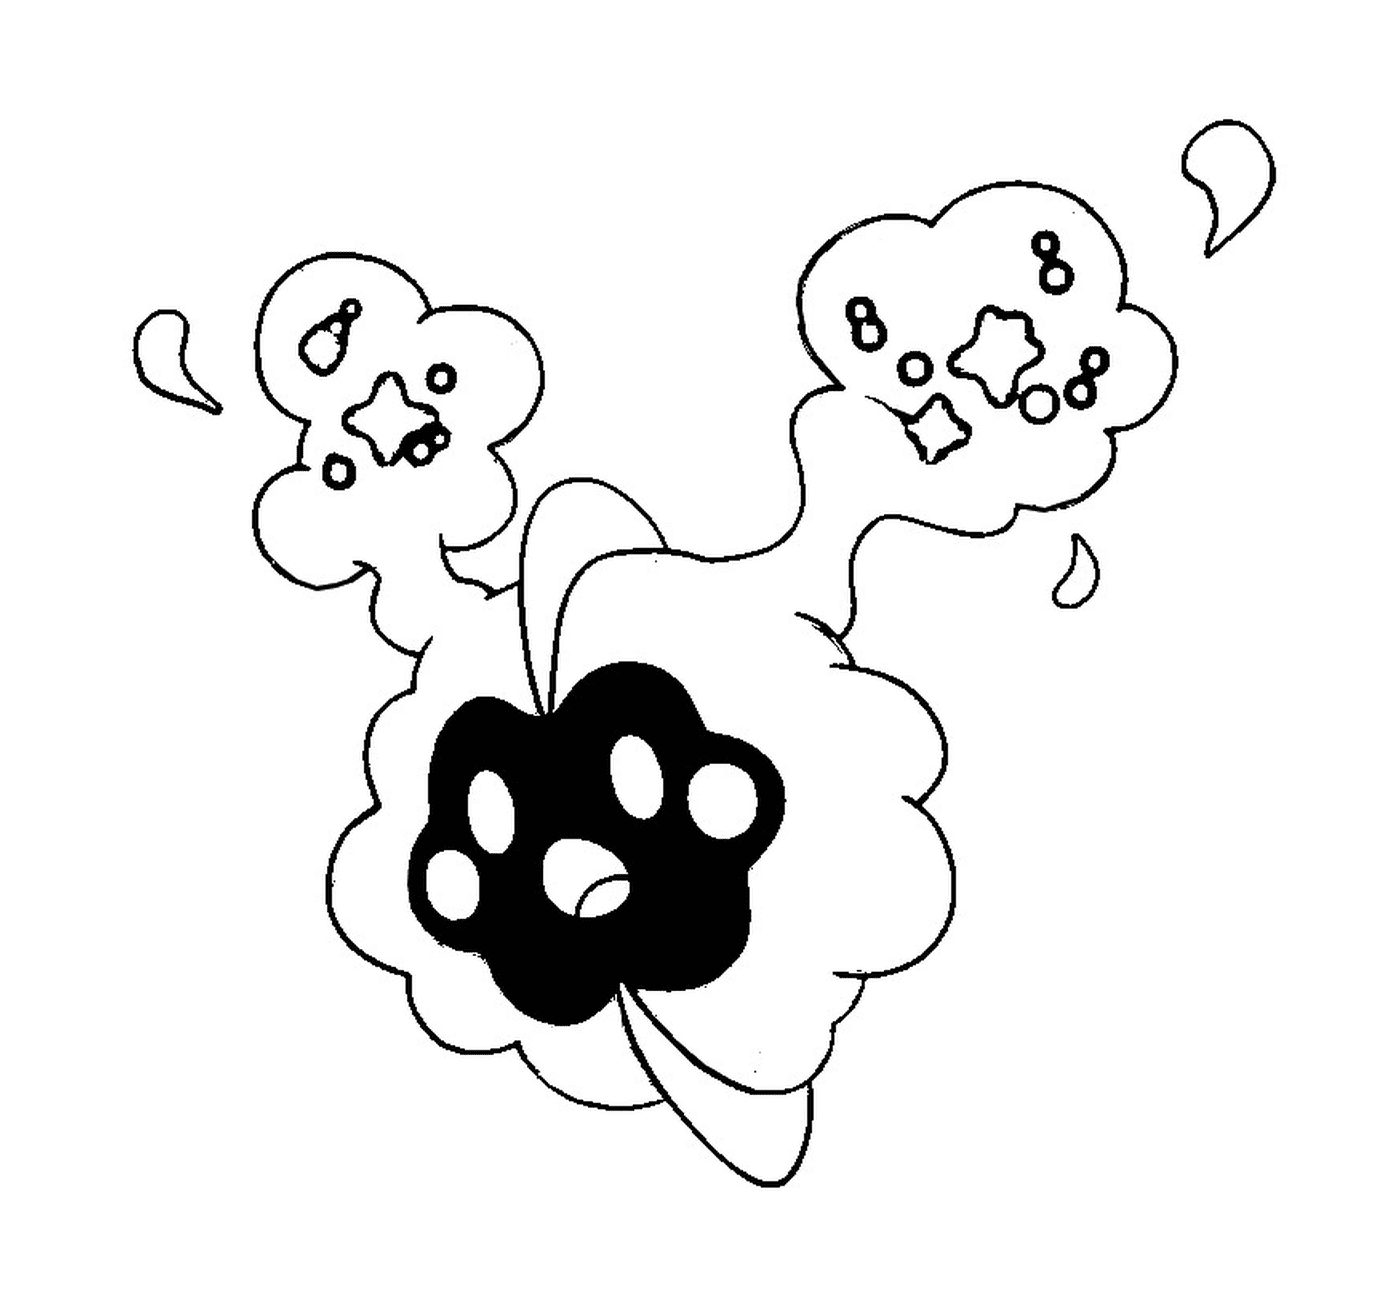  Cosmog, a paw print 